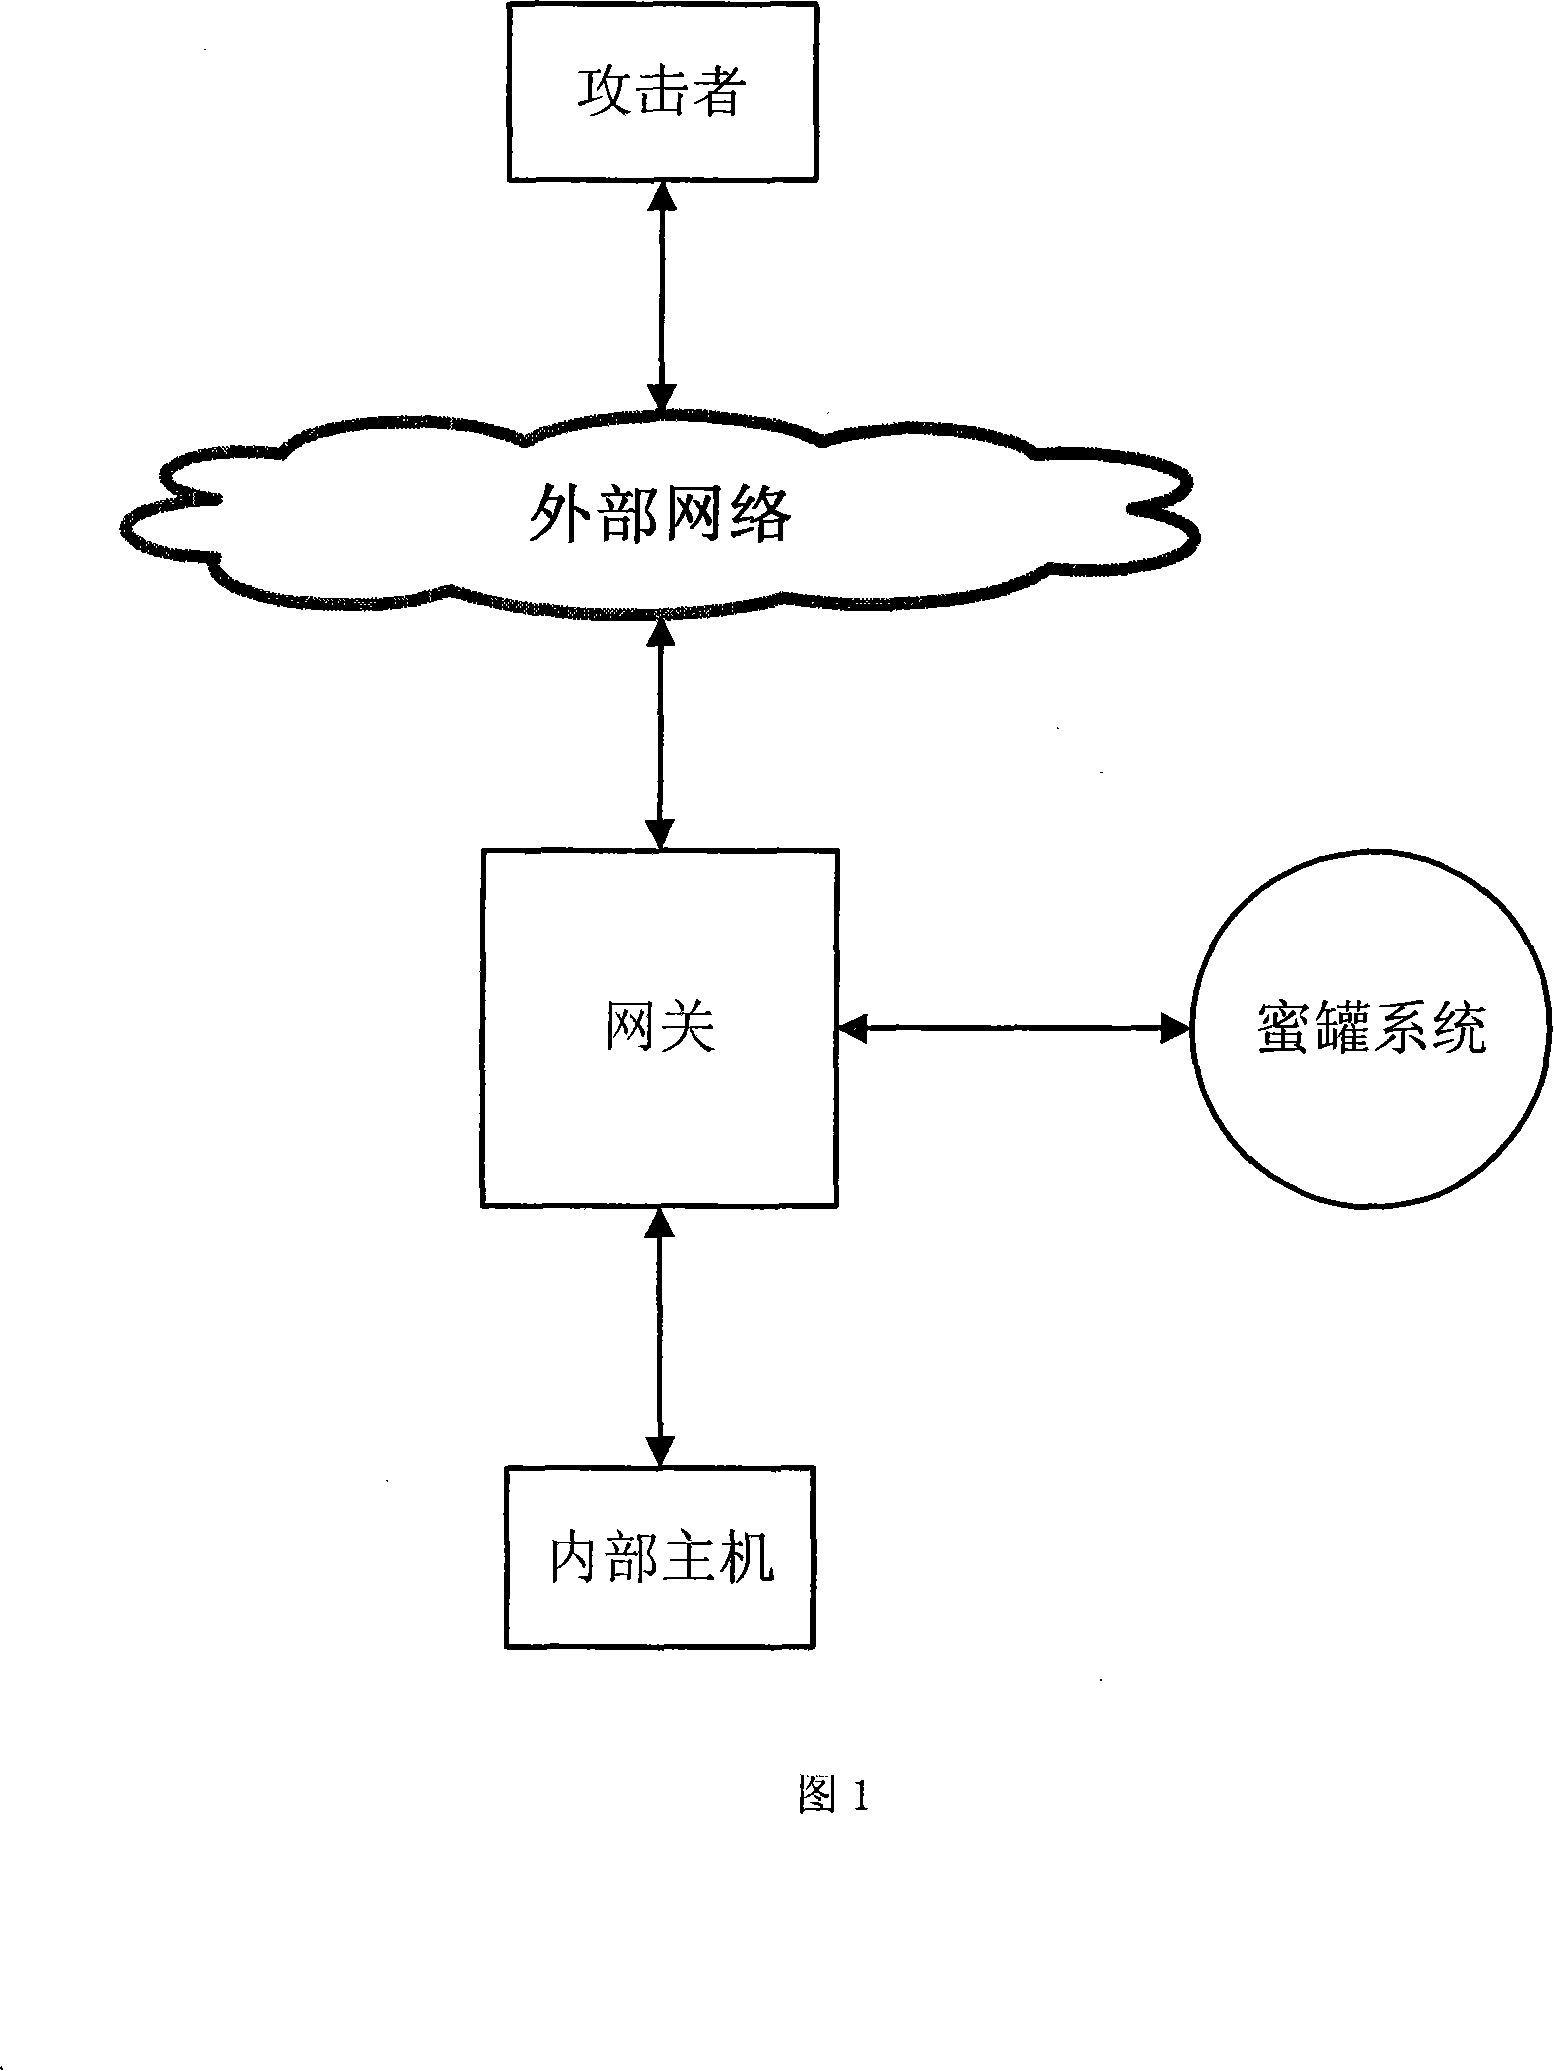 Safety detecting method and system of network data flow